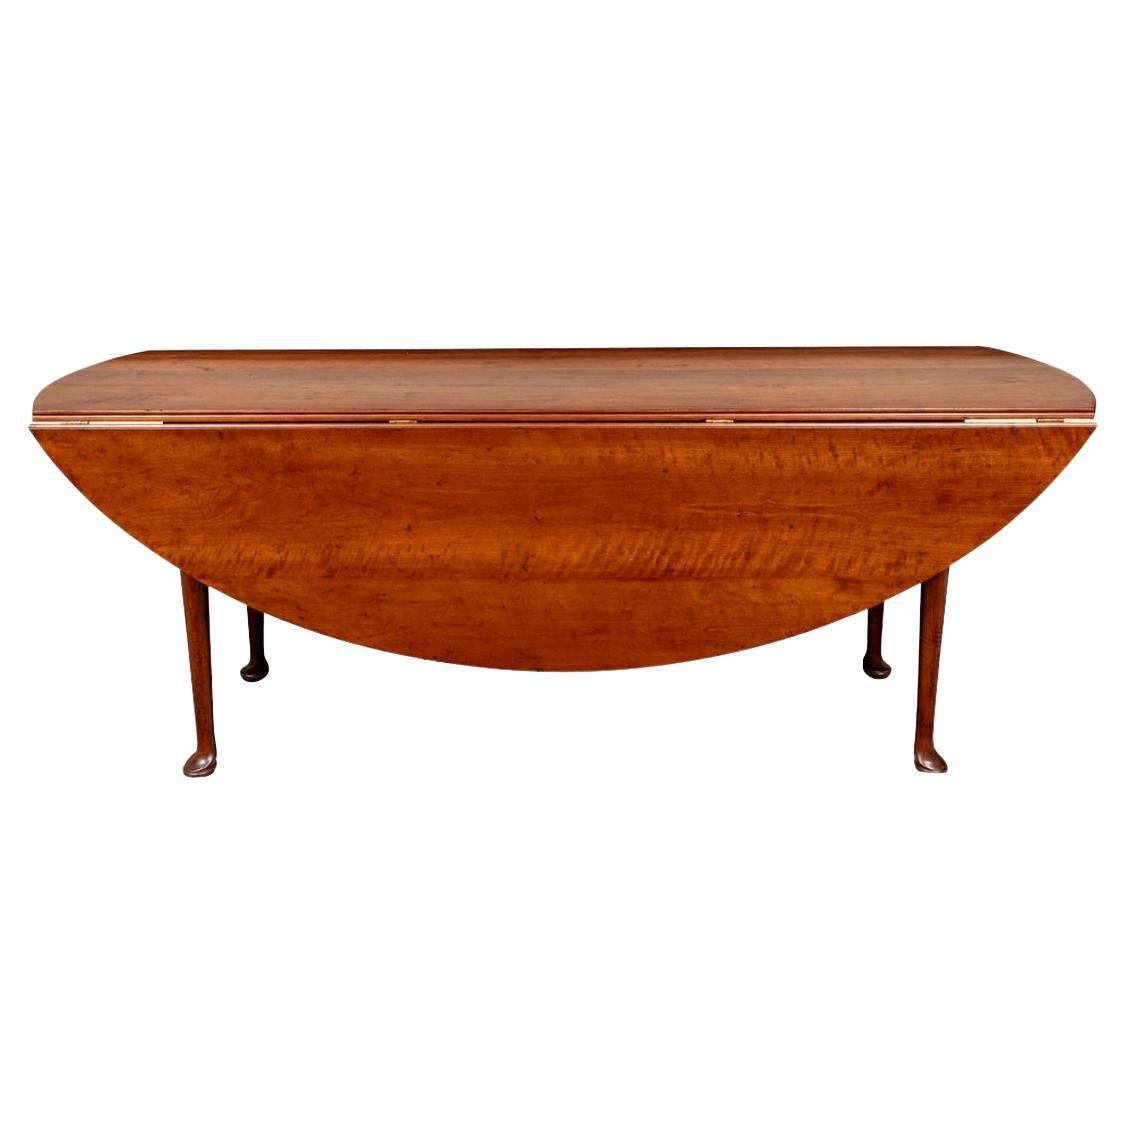 Very Fine Solid Mahogany Drop Leaf Oval Harvest Table